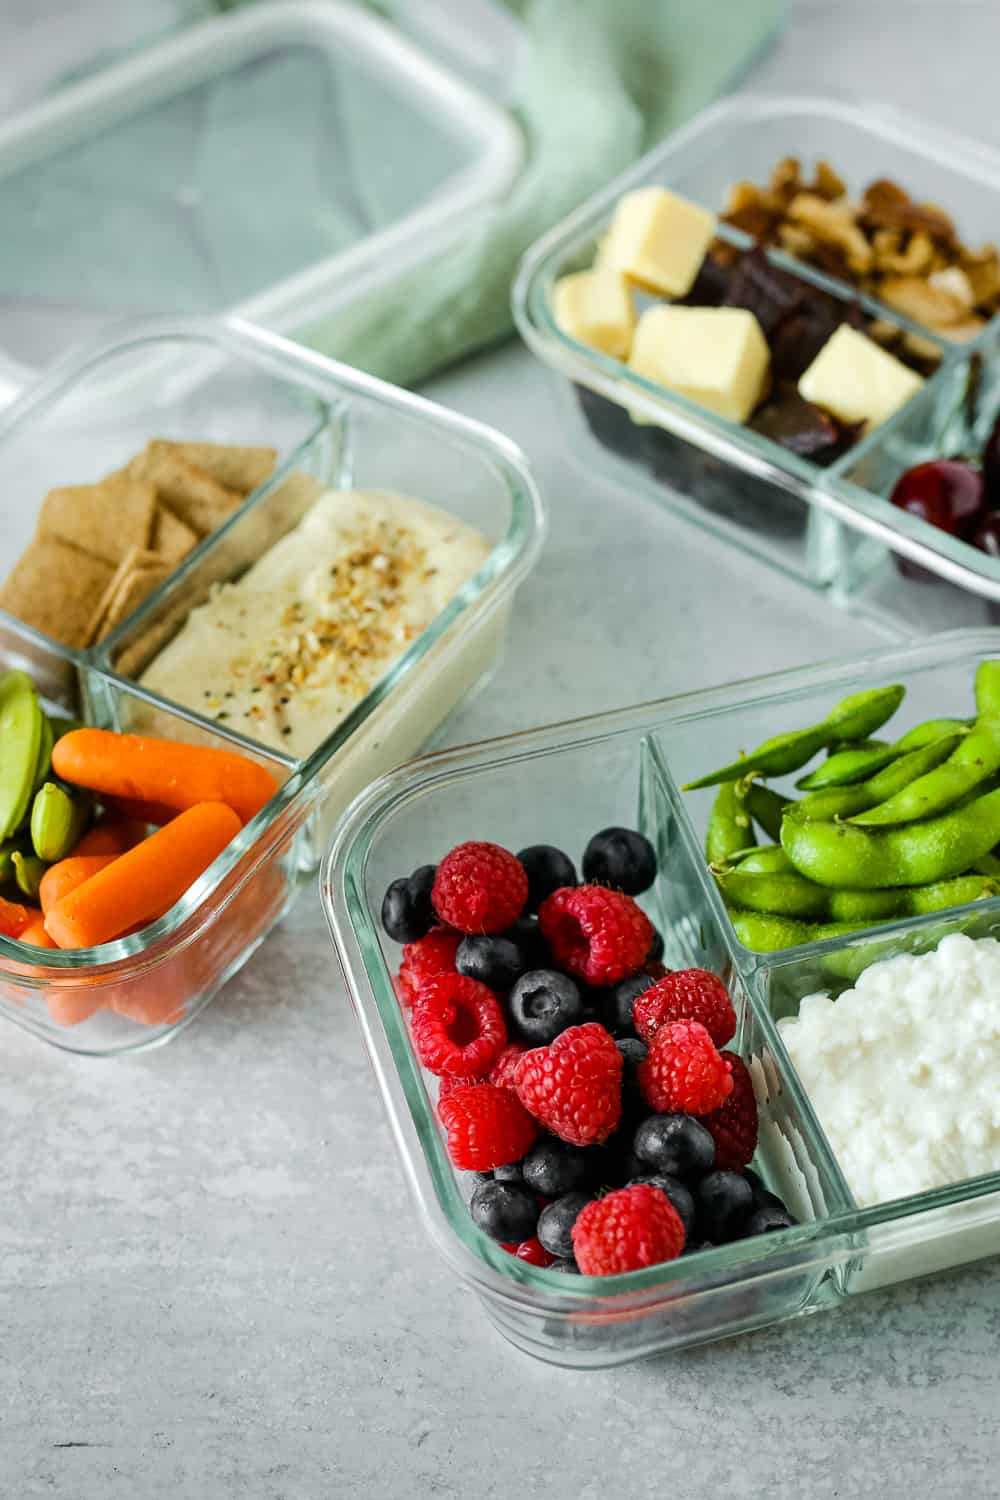 Feature image of snack meals in storage containers with lids